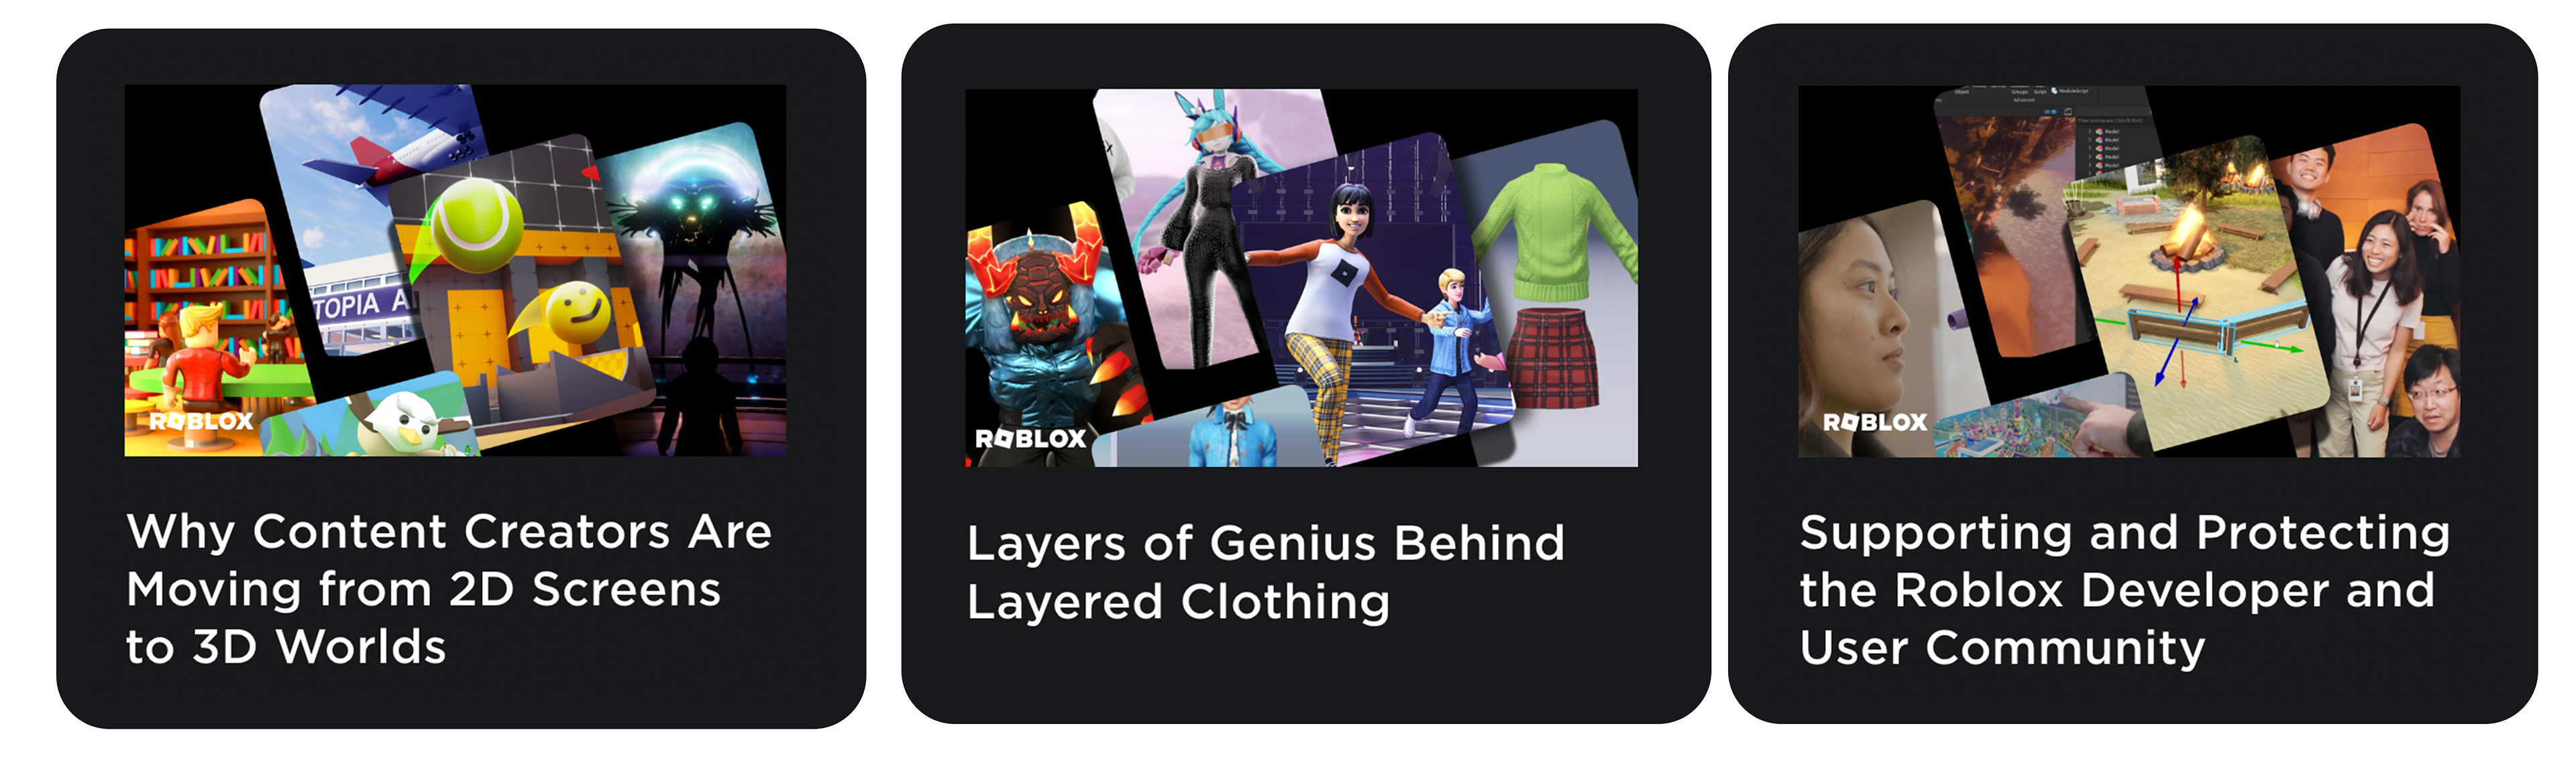 Layers of Genius Behind Layered Clothing - Roblox Blog